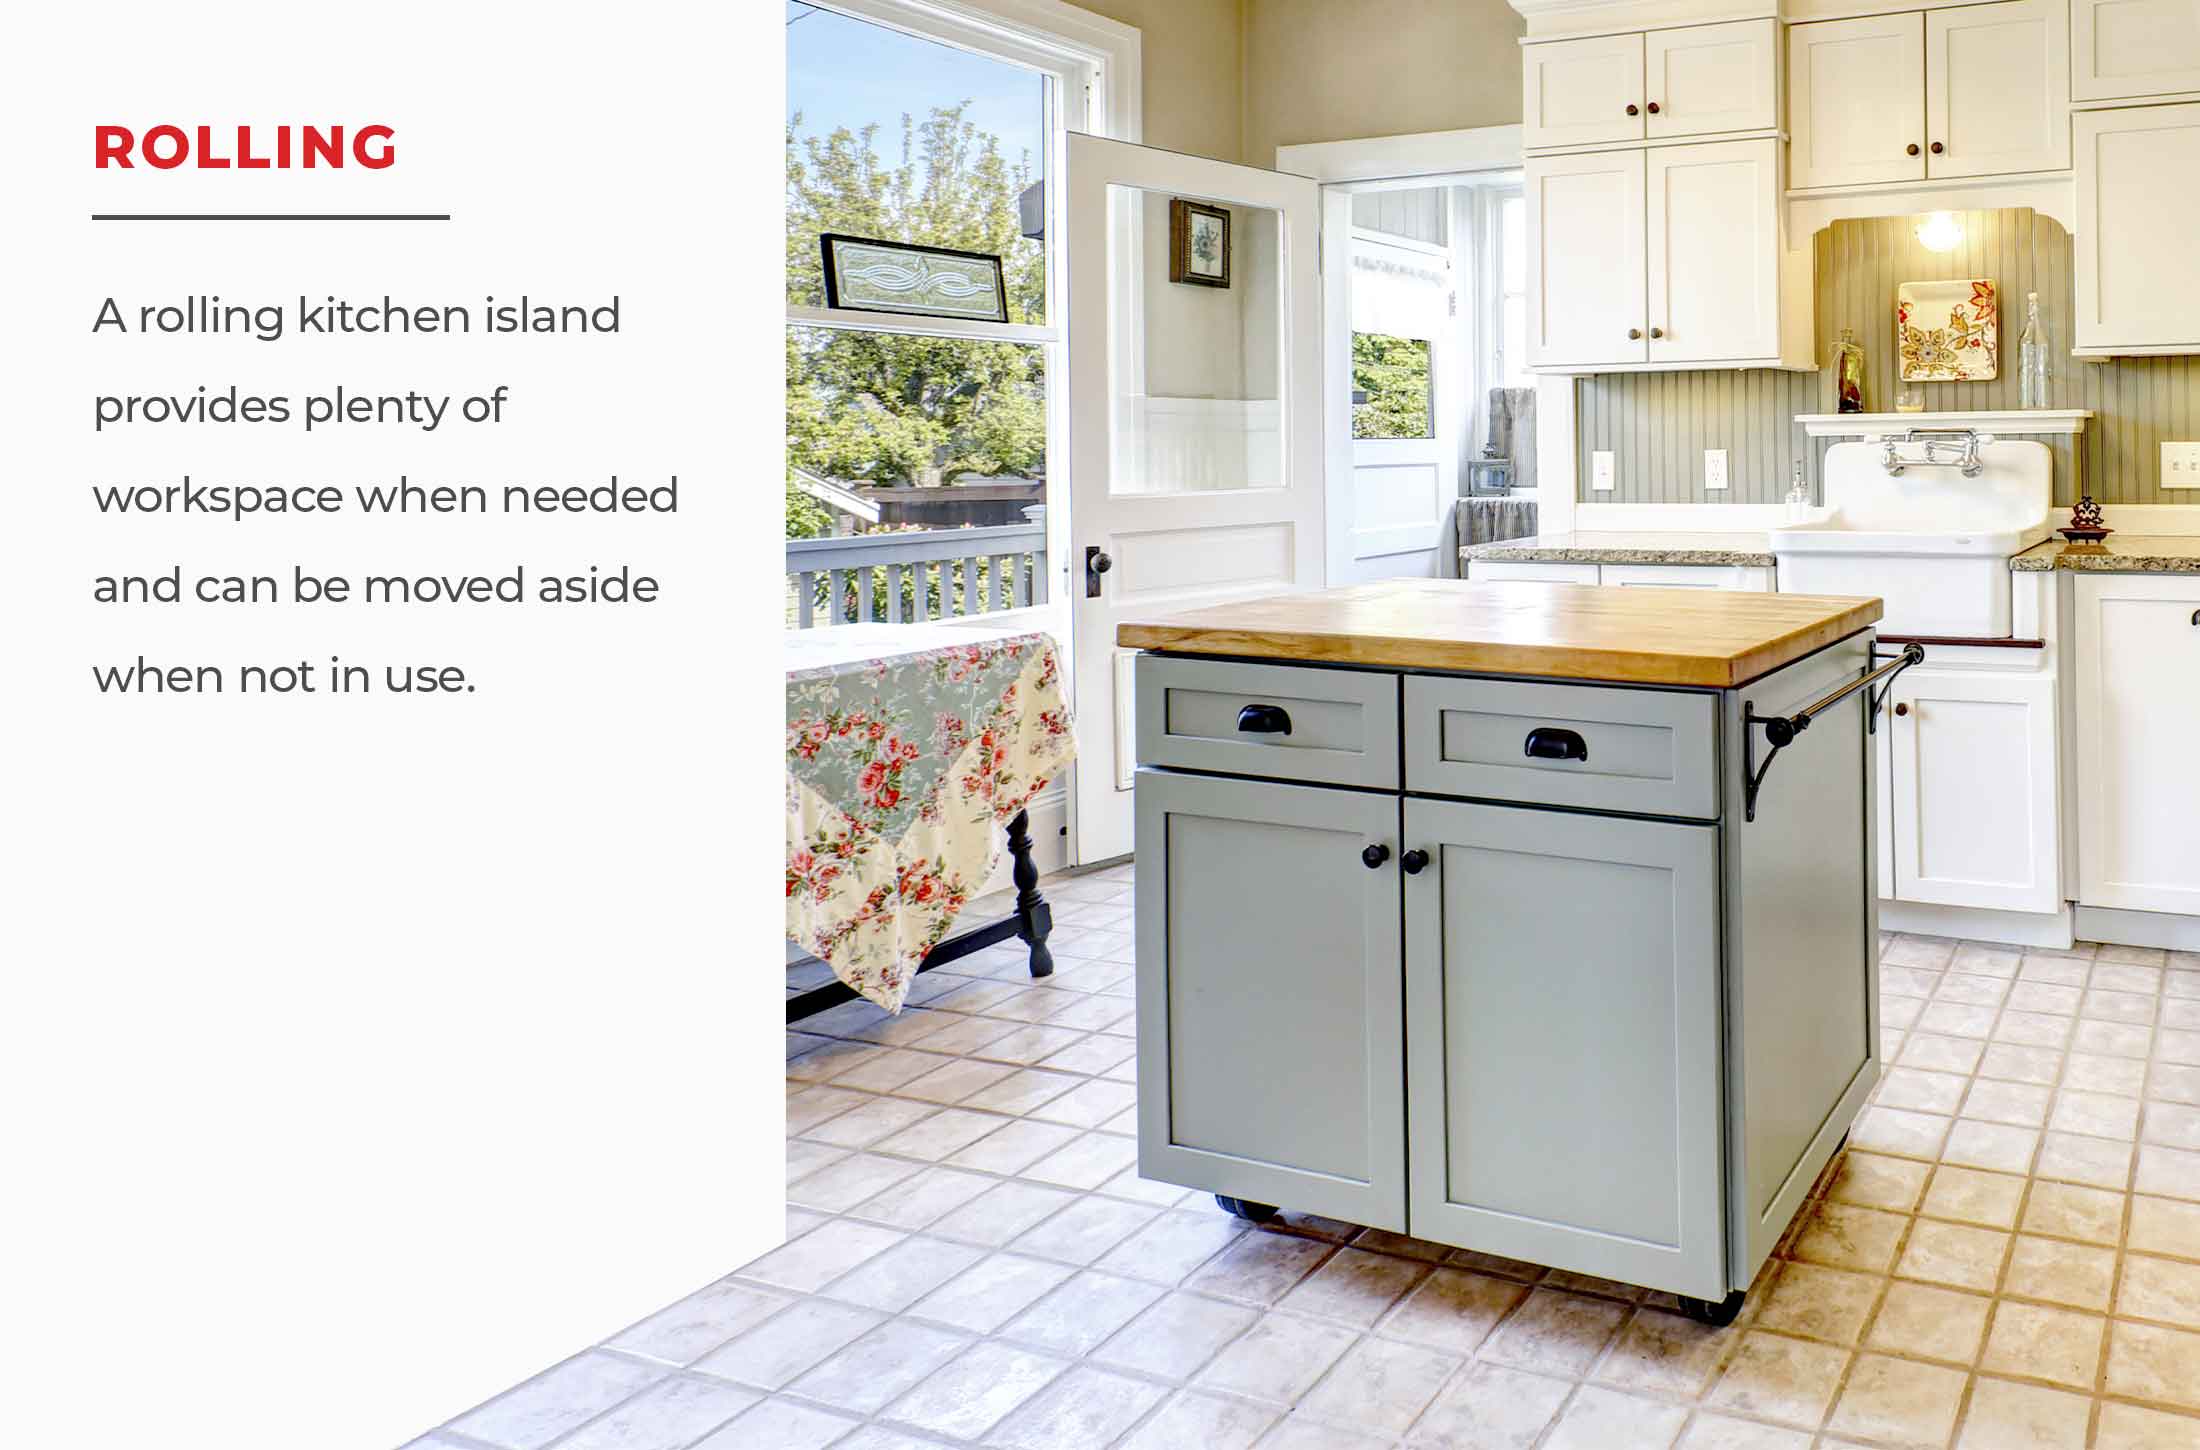 A rolling kitchen island provides plenty of workspace when needed and can be moved aside when not in use.